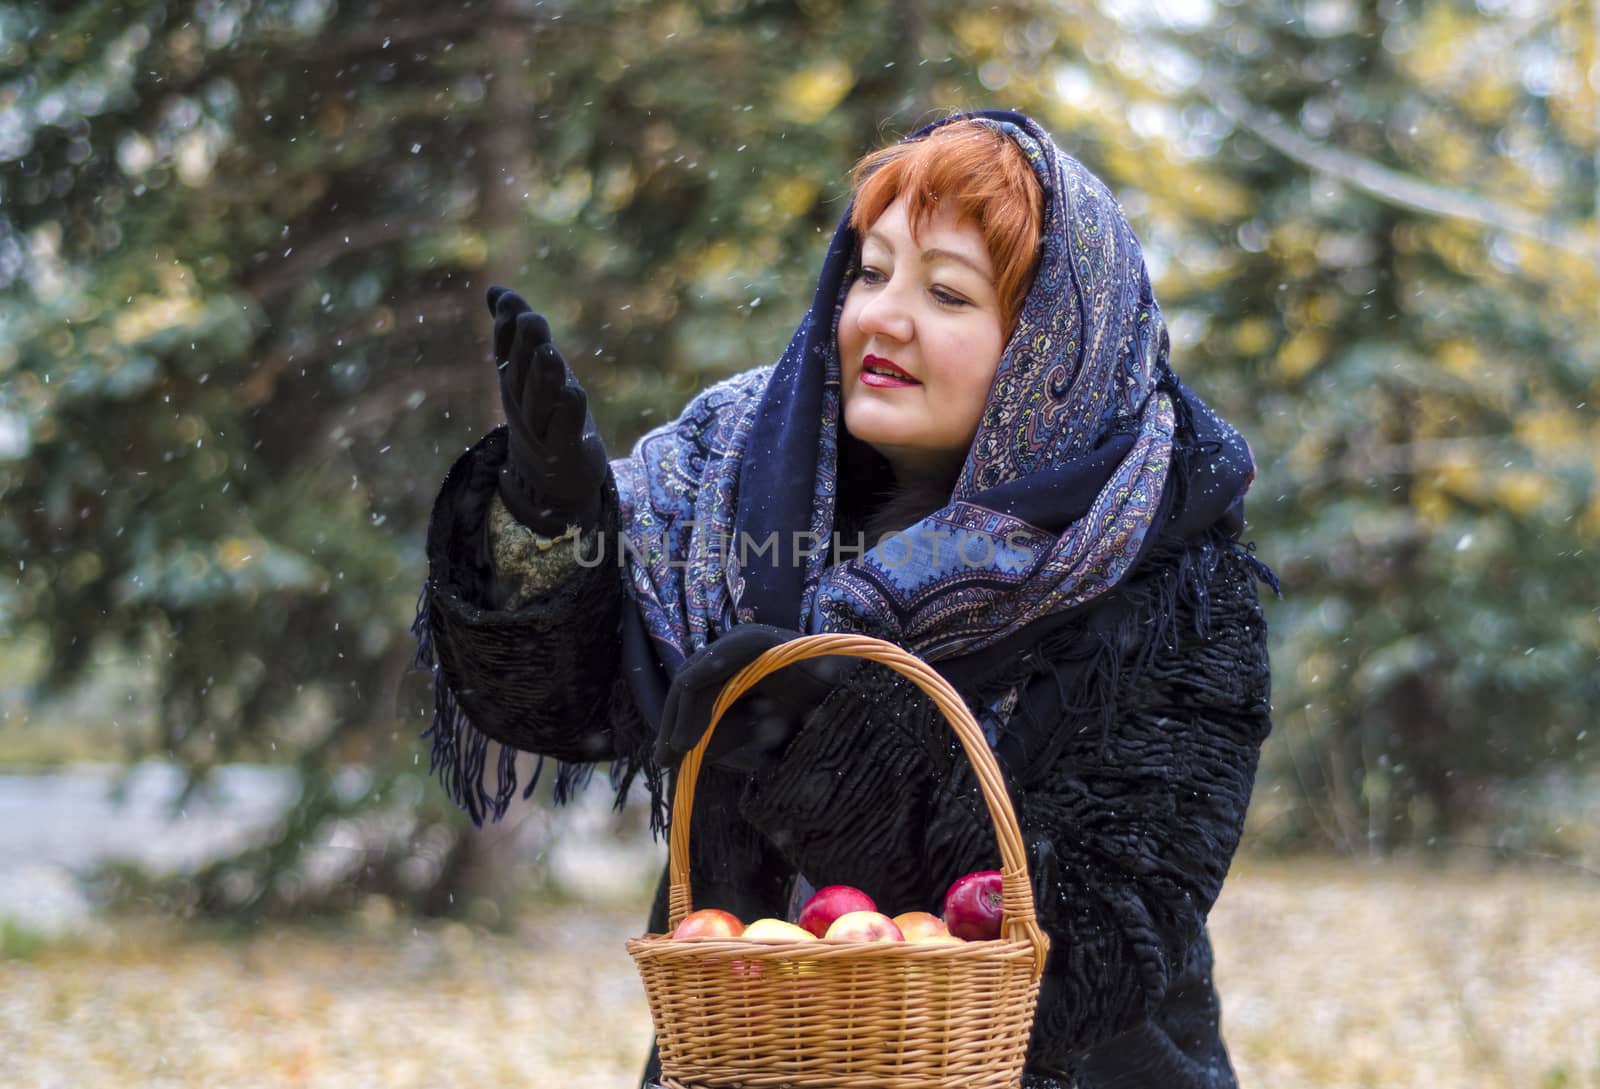 Woman with basket of apples in the forest, comes the first snow. She catches snowflakes in the palm of his hand, and rejoices.